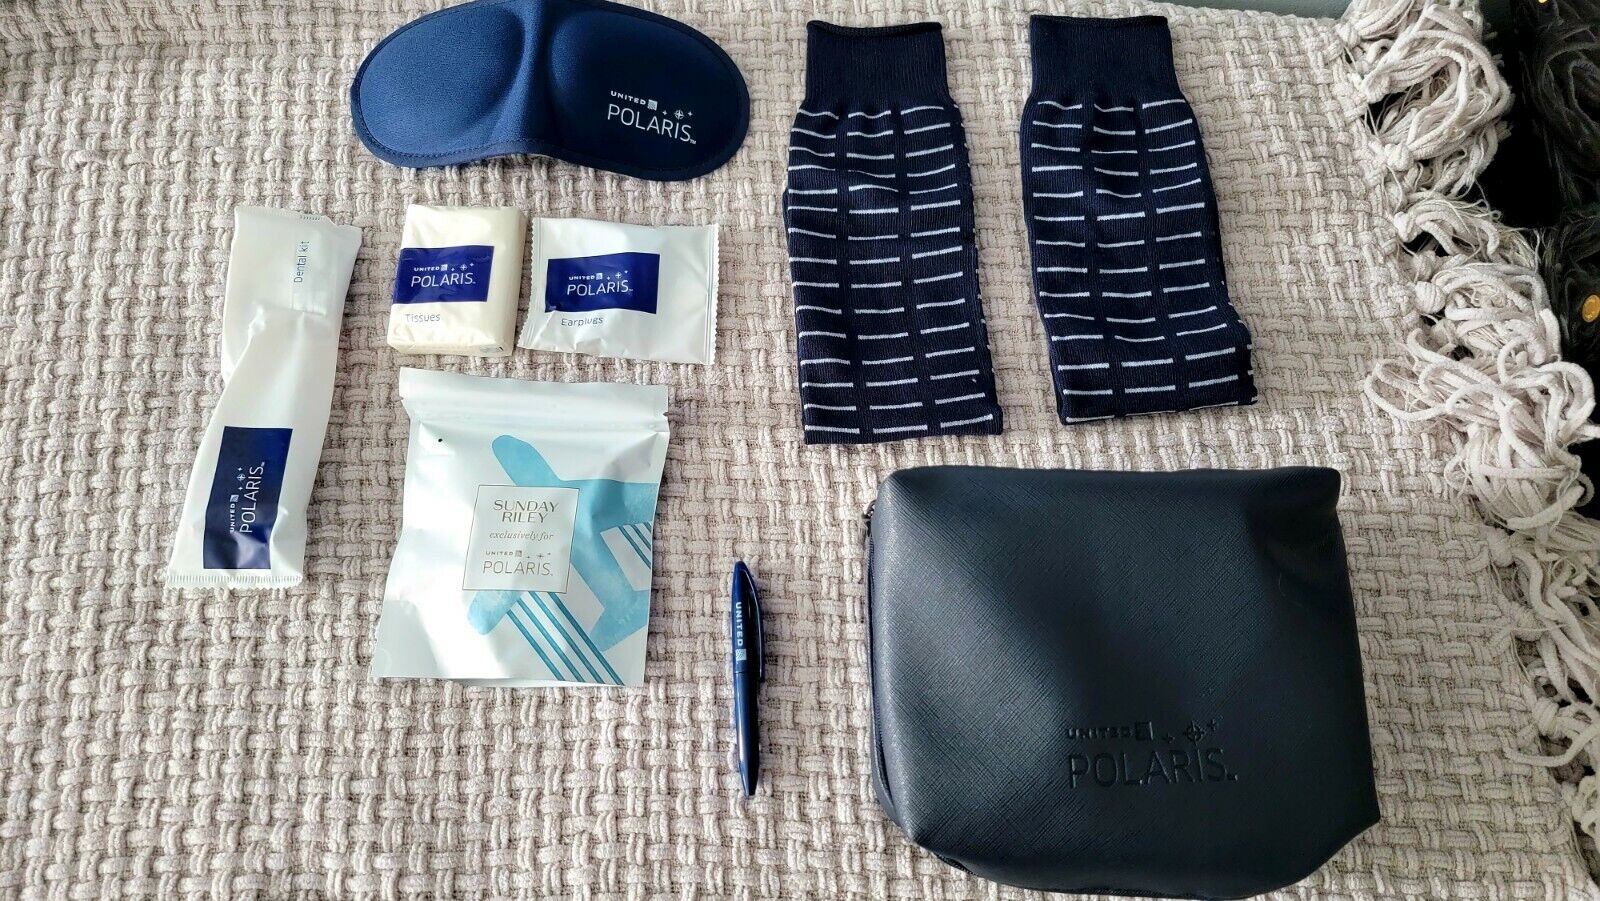 New Sealed United Polaris Business First Class Amenity Travel Kit Bag